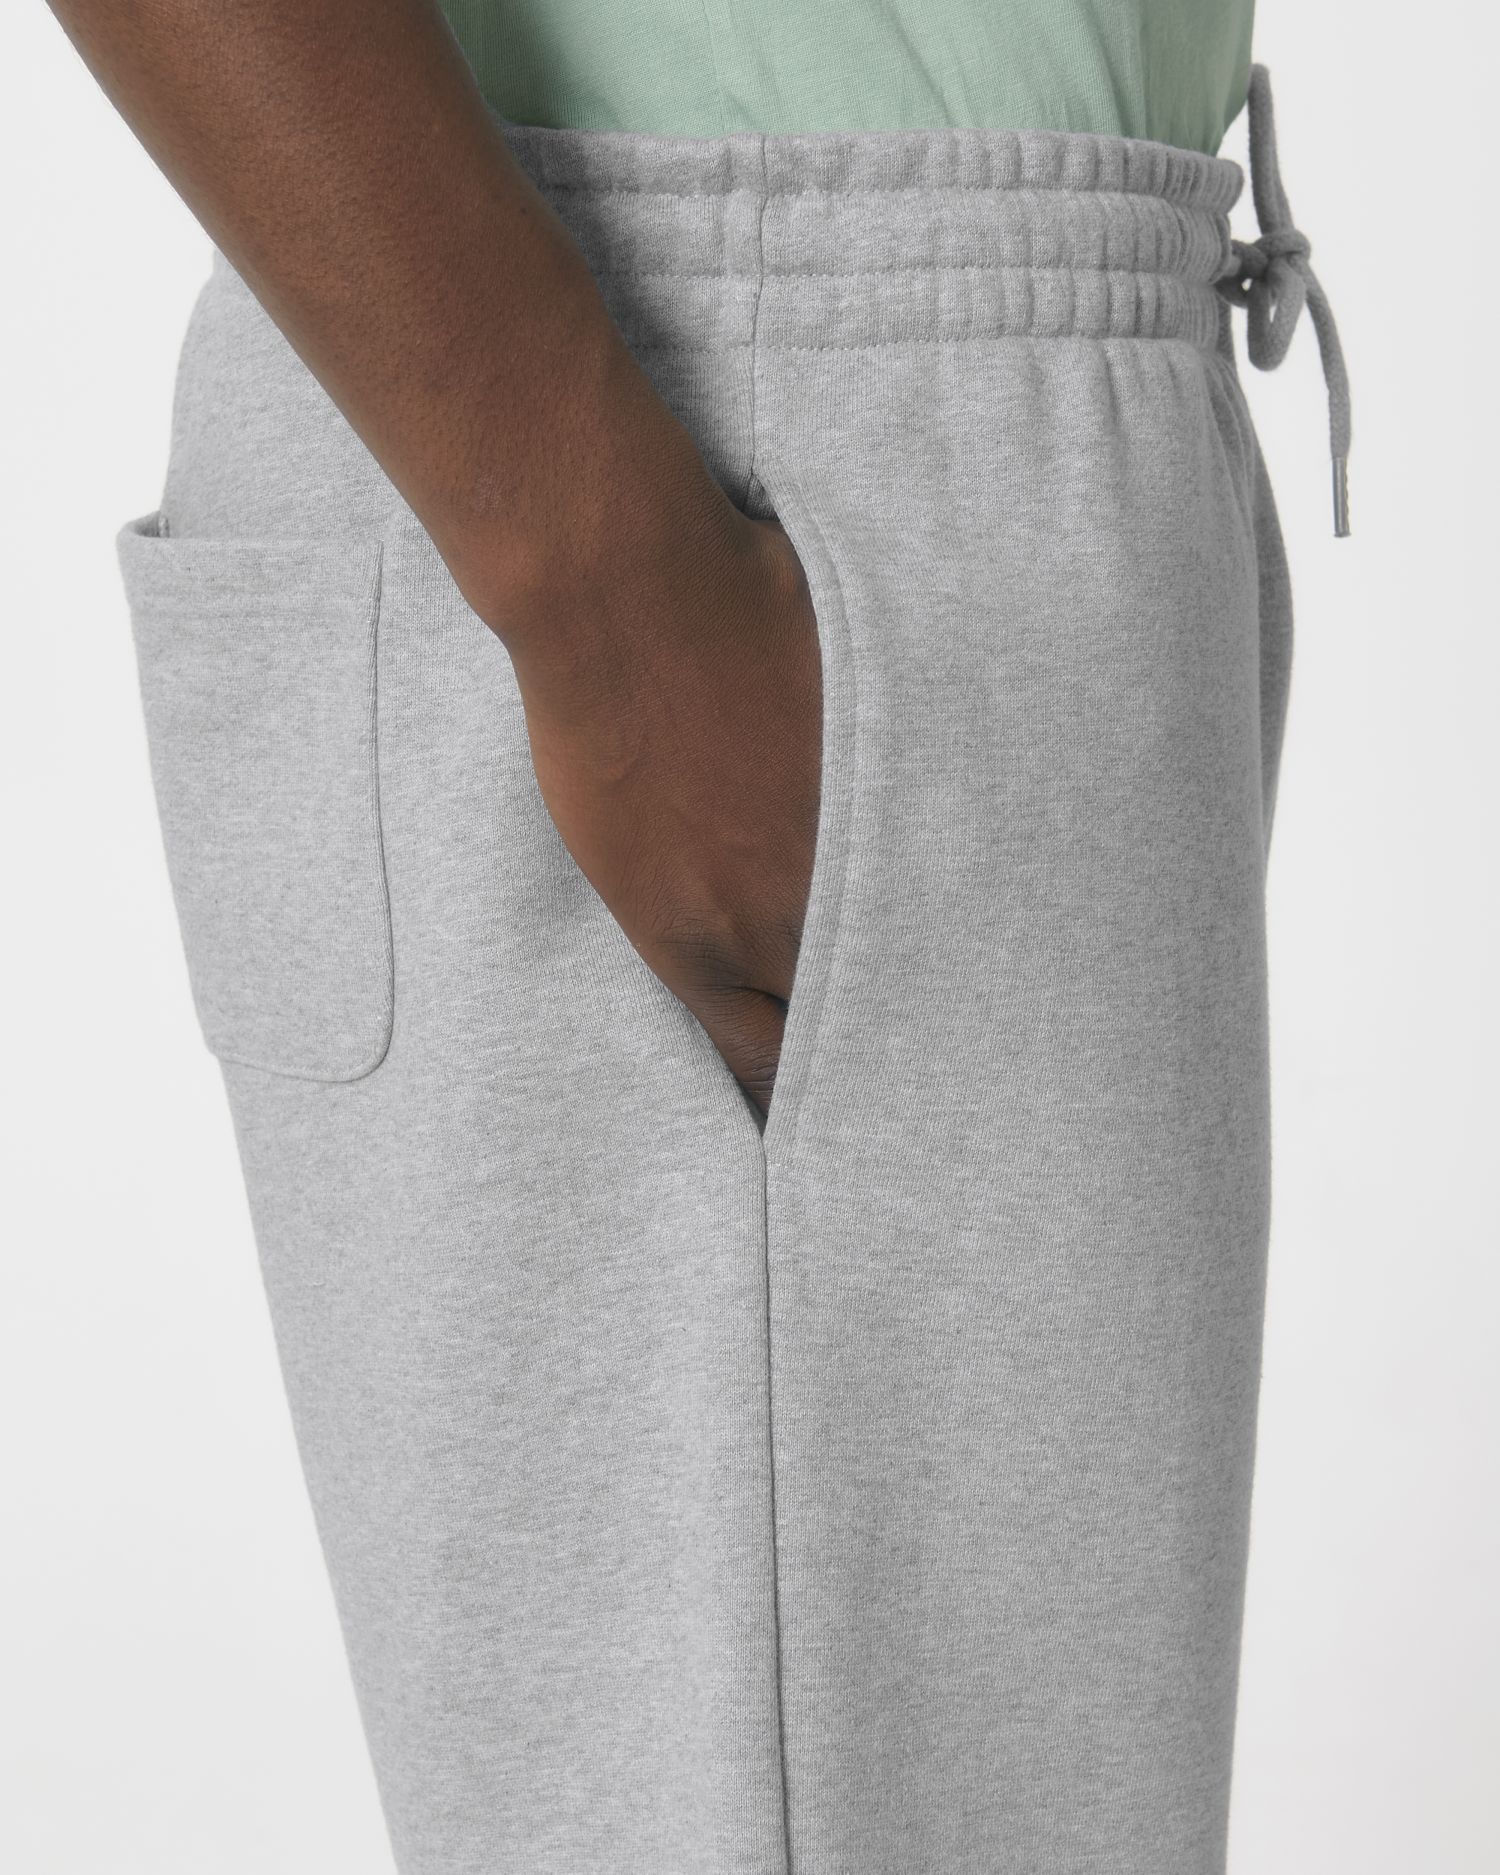 Joggingshorts Boarder Dry in Farbe Heather Grey